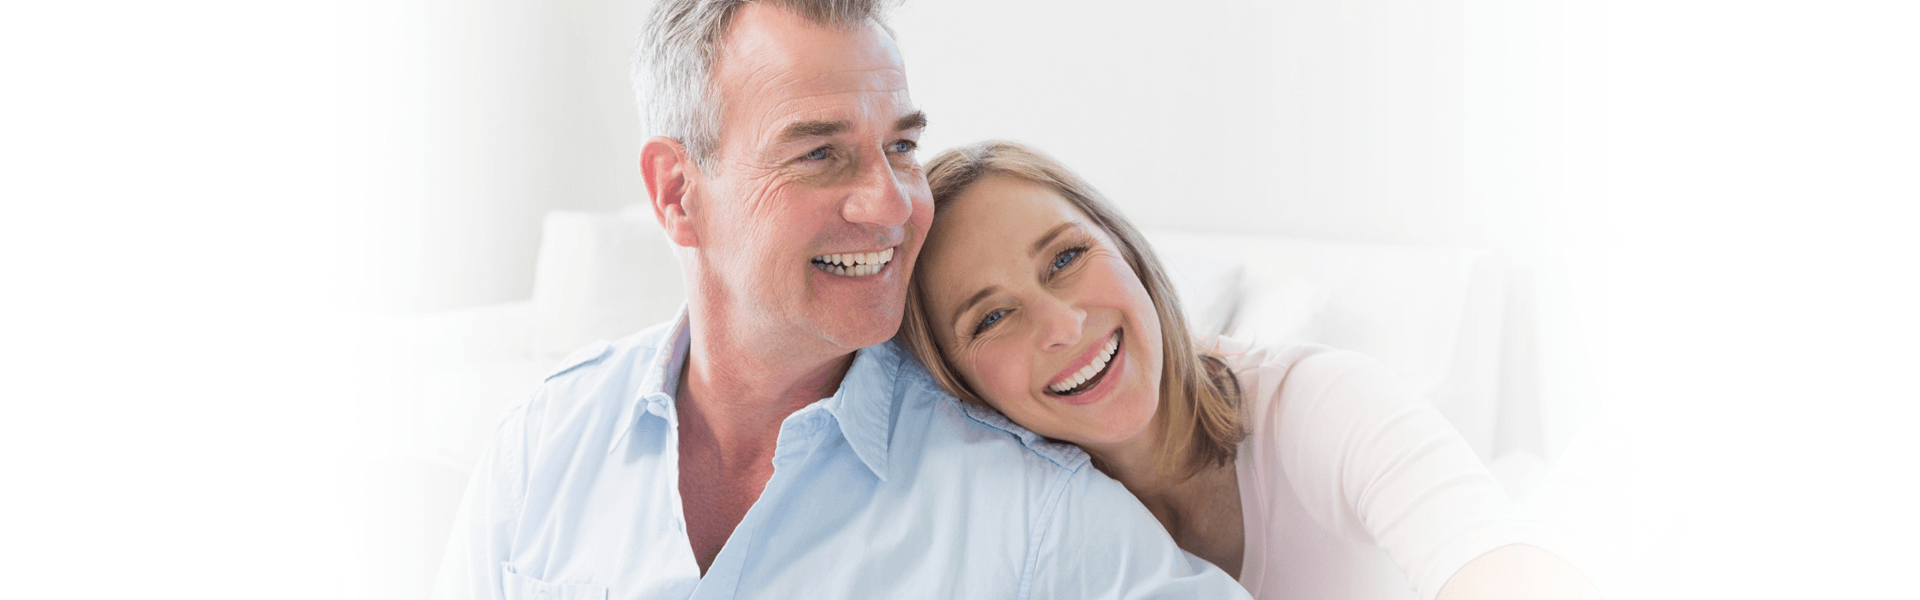 Dental Implant and Tooth Implant Service